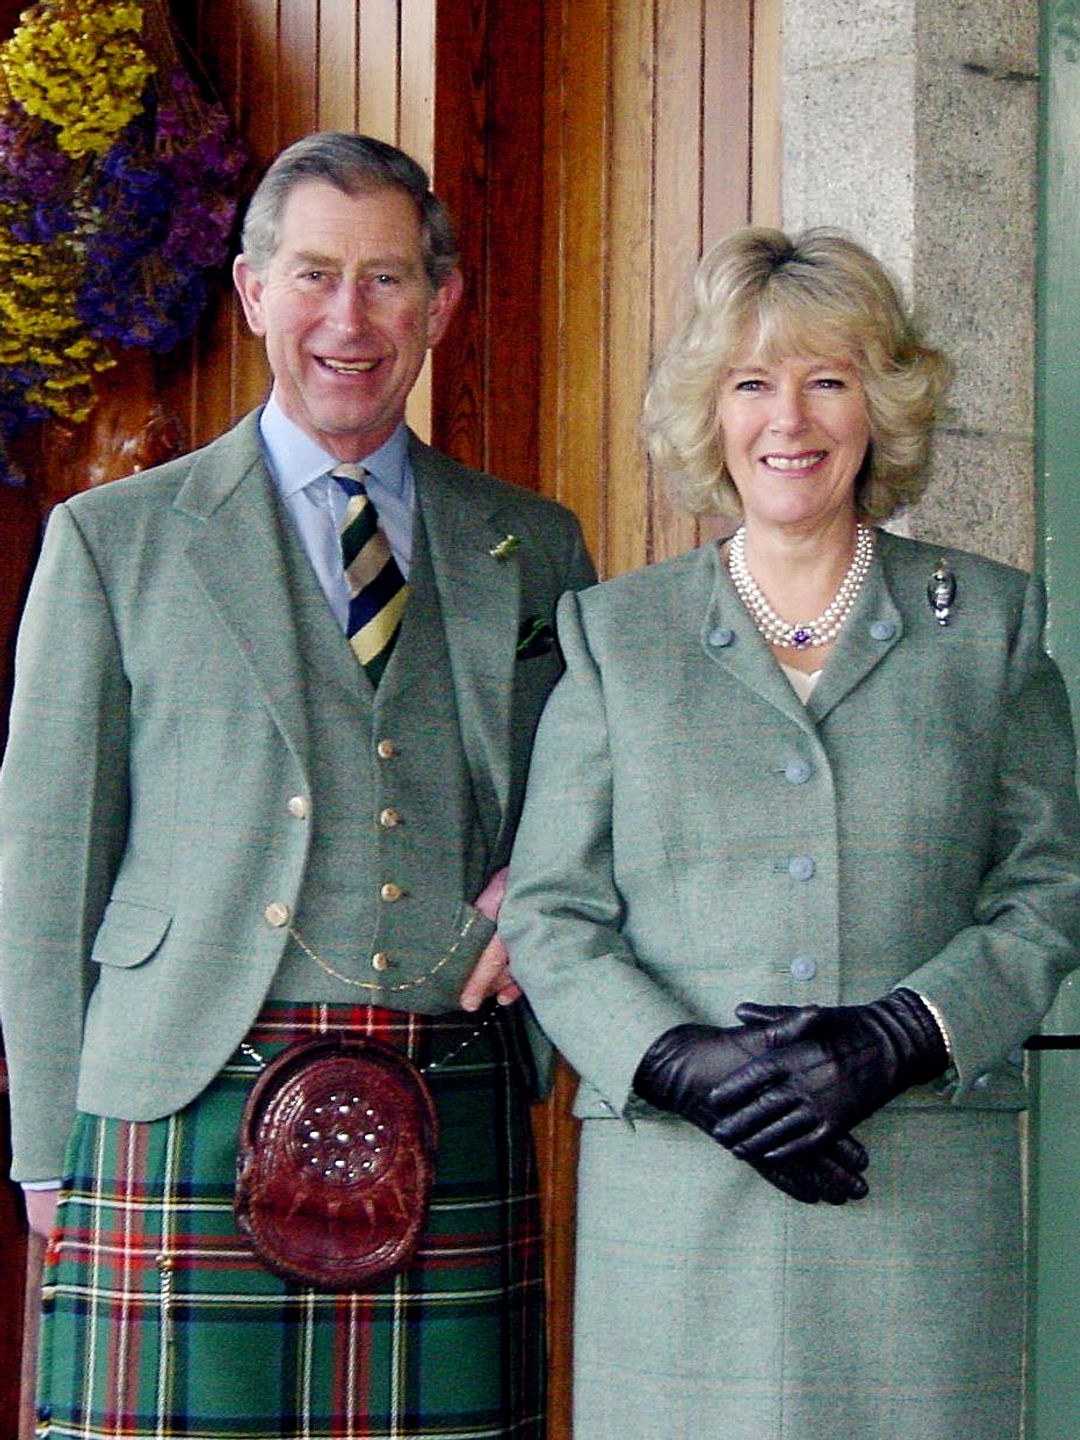 King Charles in a kilt standing with Queen Camilla in a green outfit